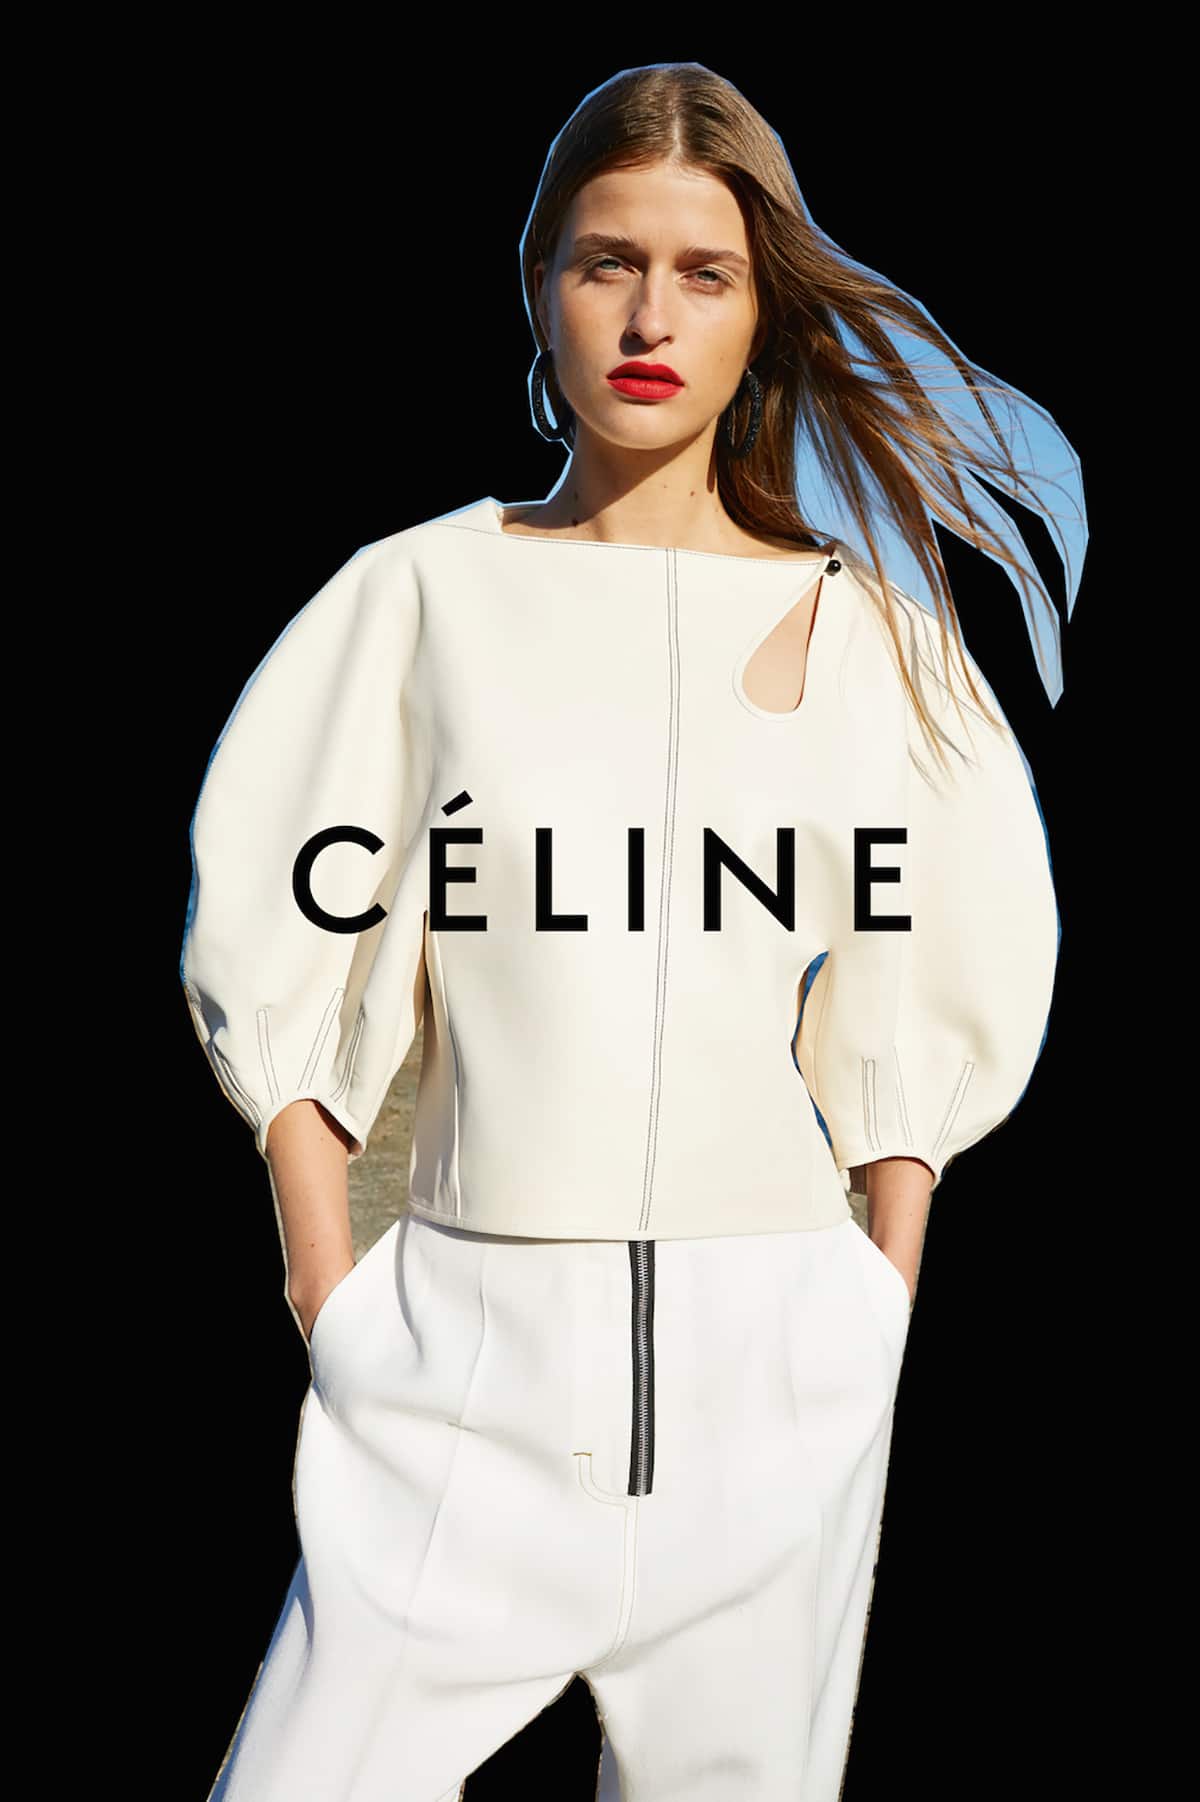 Celine Summer 2016 Ad Campaign | Spotted Fashion